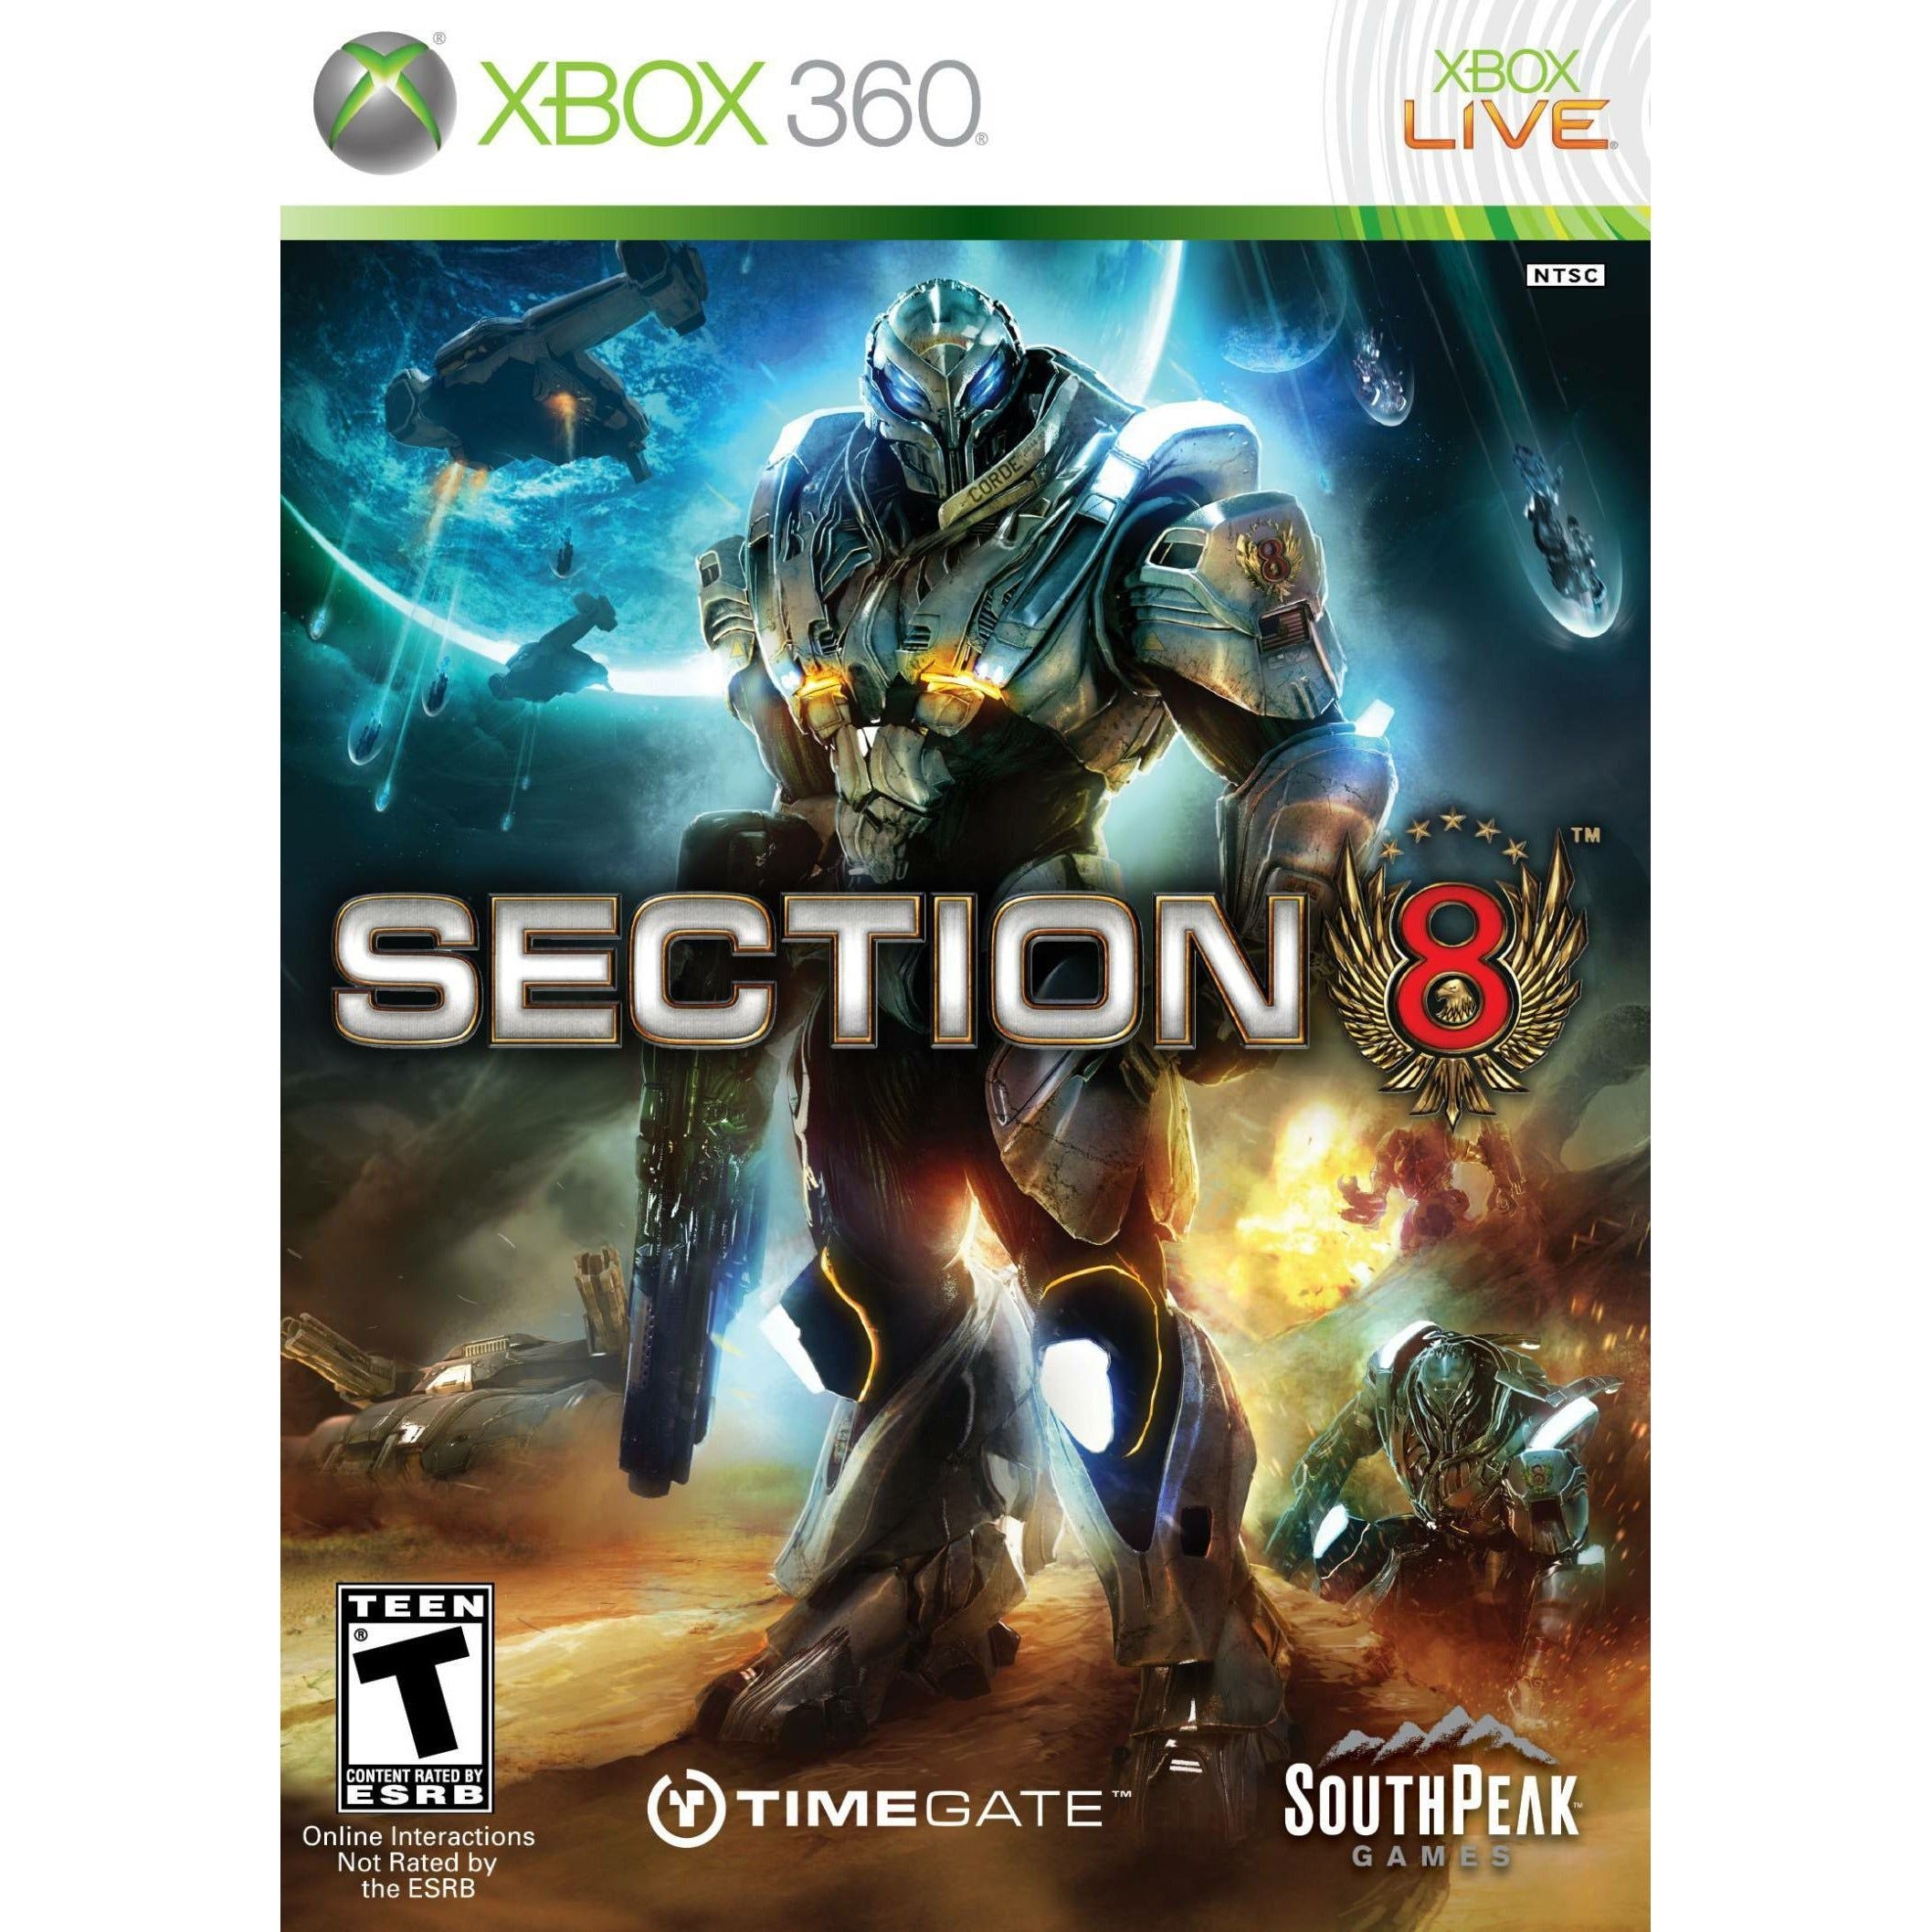 XBOX 360 - Section 8